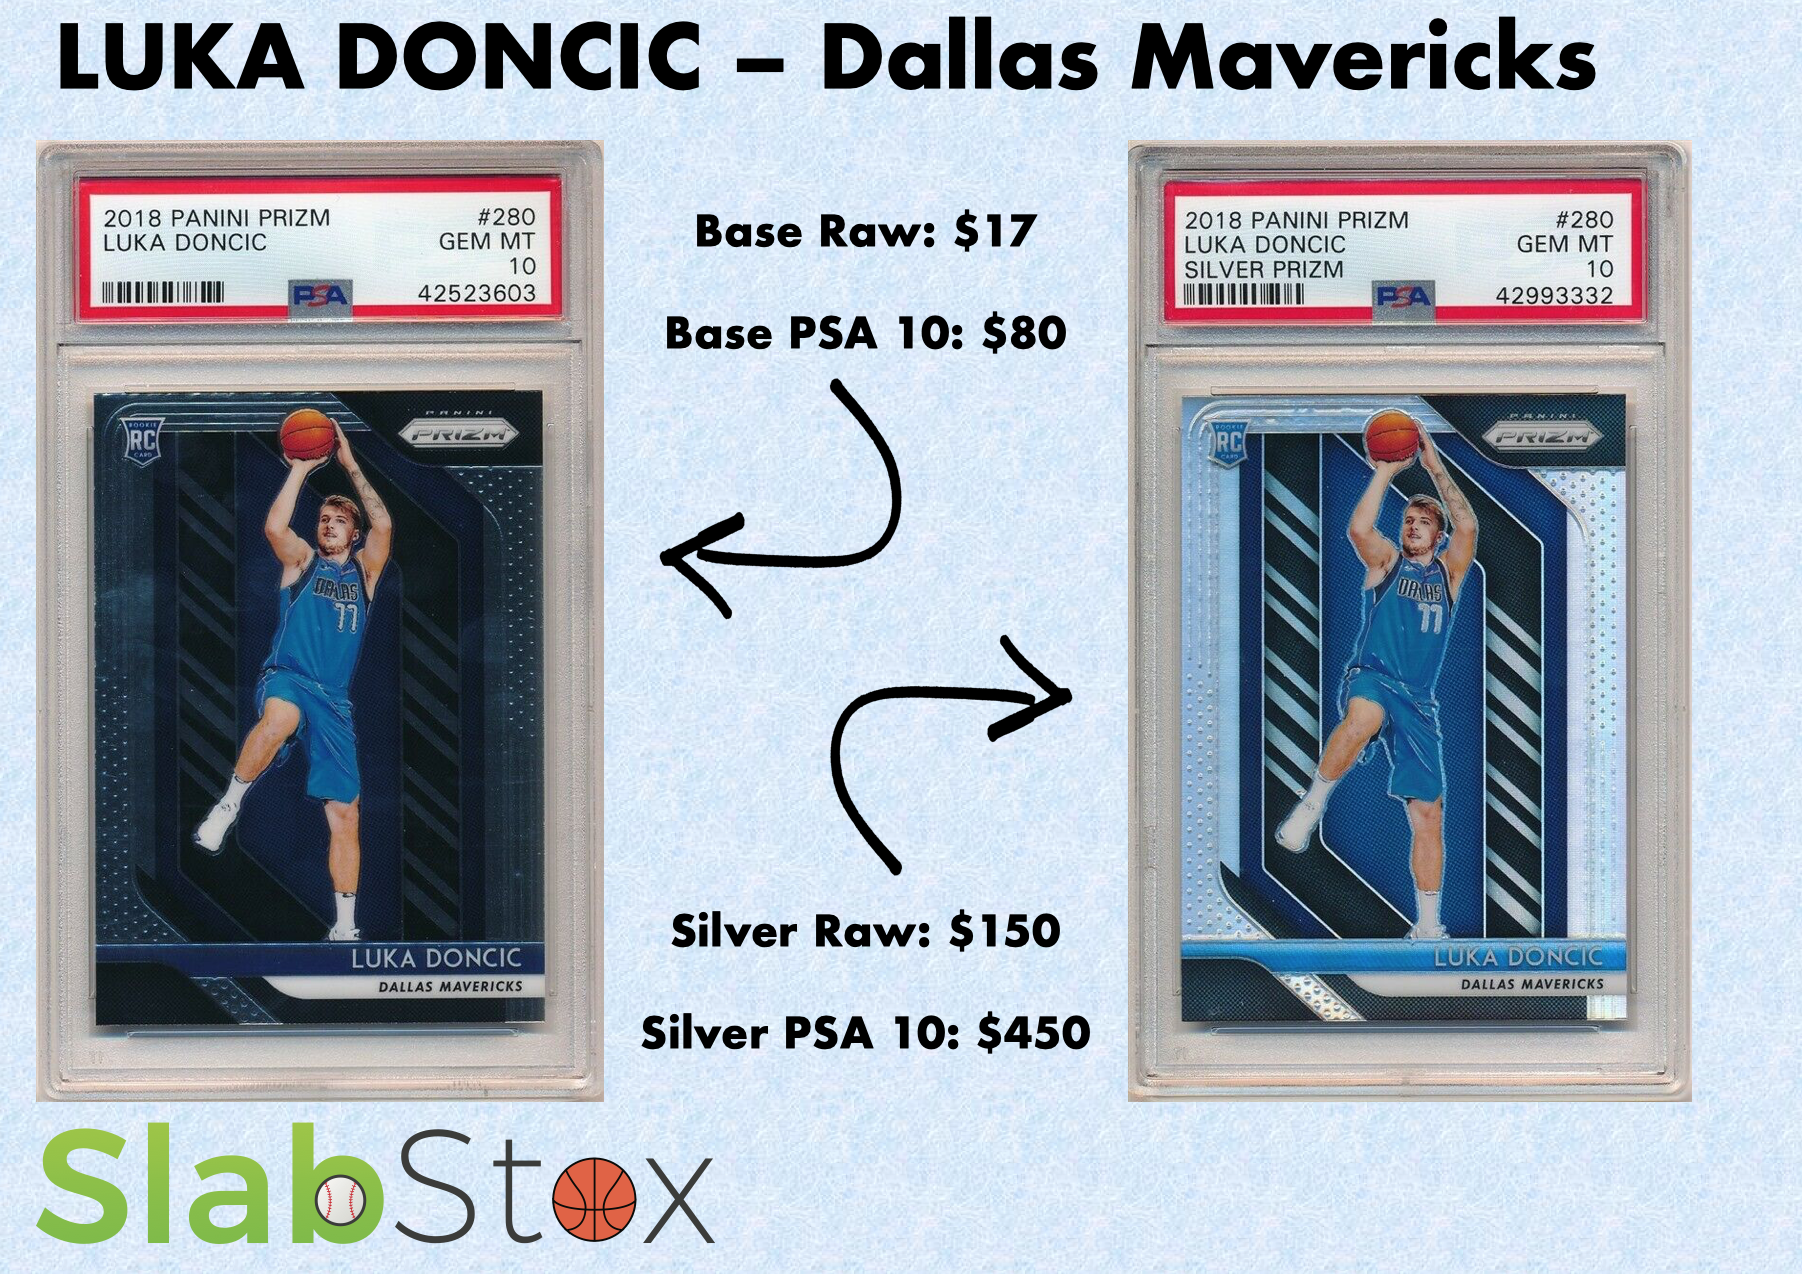 SlabStox infographic for Luka Doncic sports trading cards